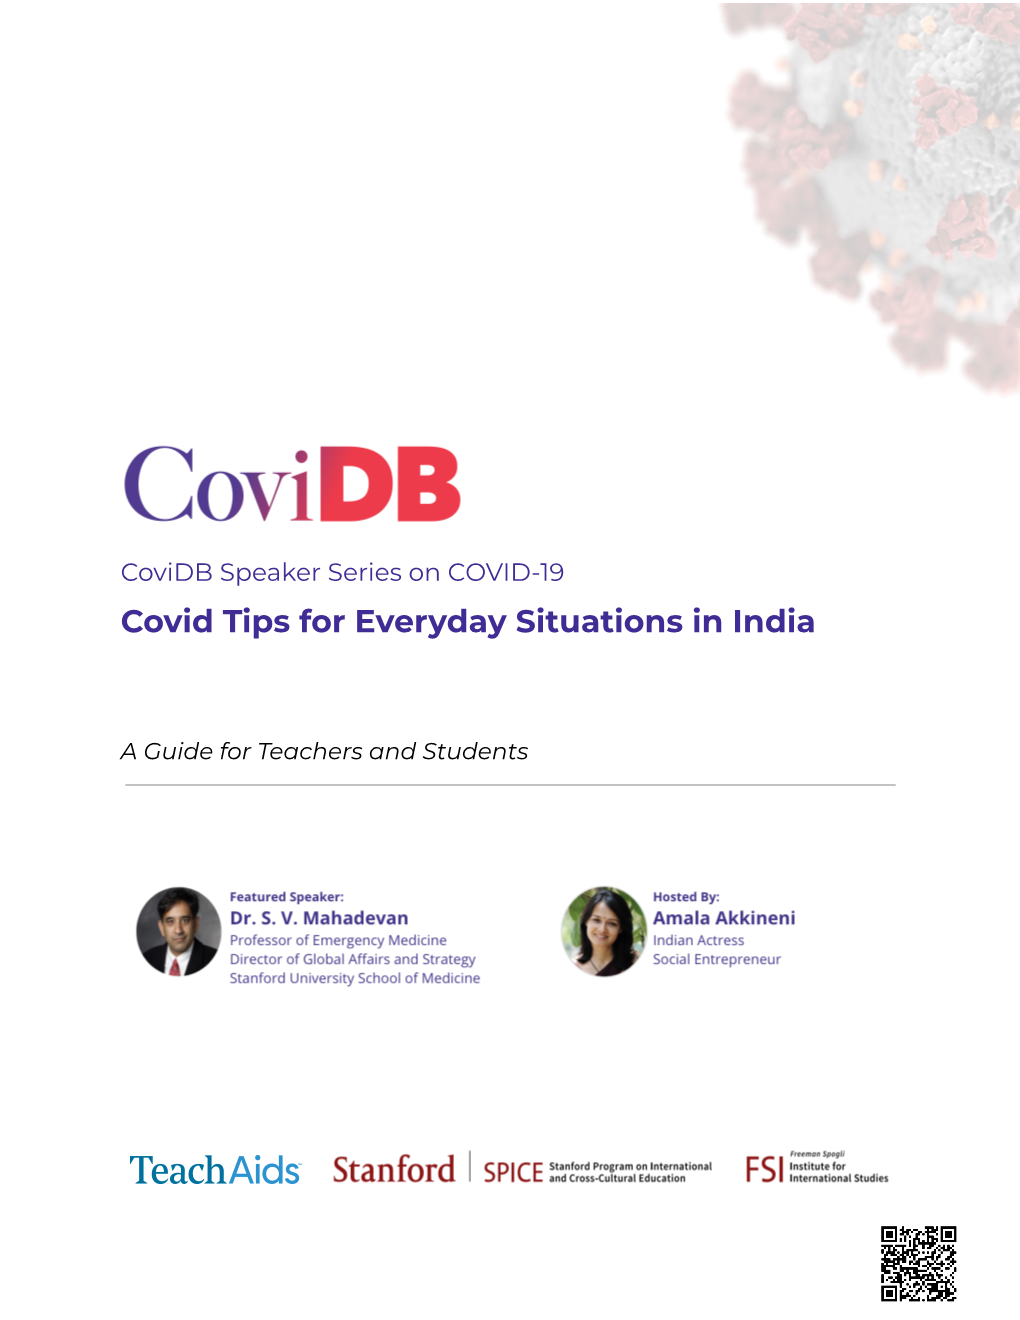 Covid Tips for Everyday Situations in India